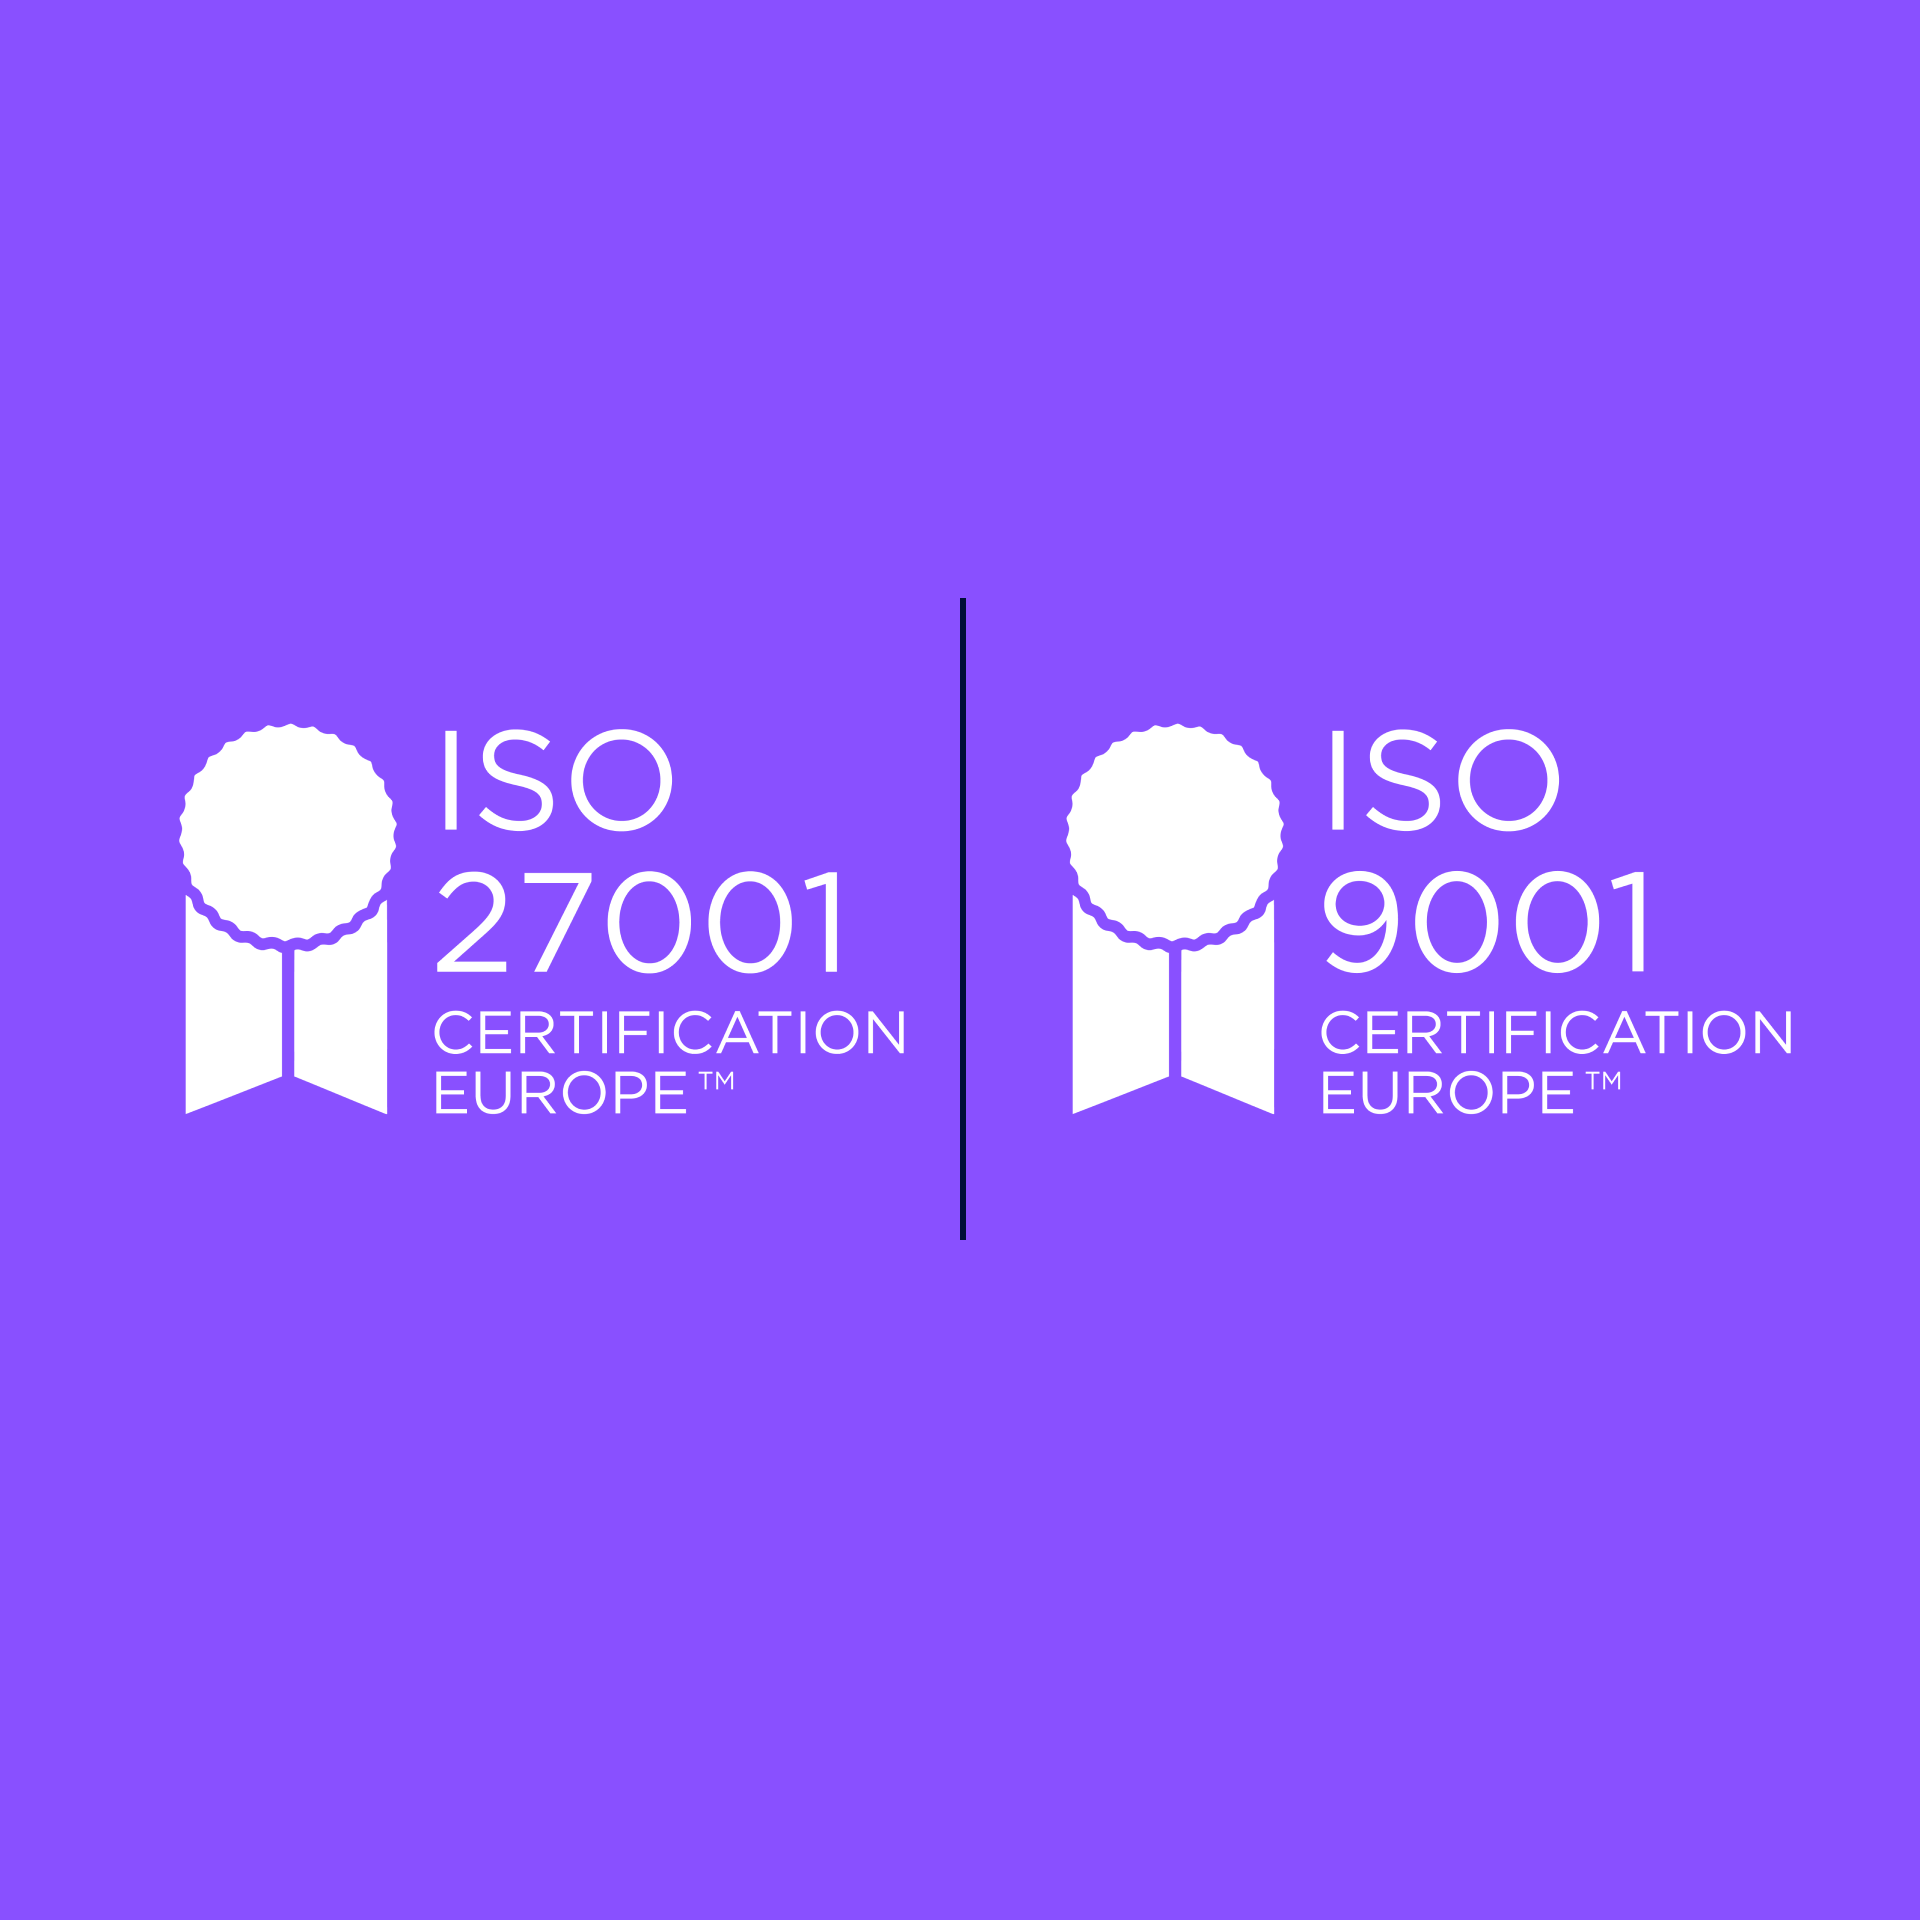 Nearform achieves recertification to ISO 9001 and ISO 27001